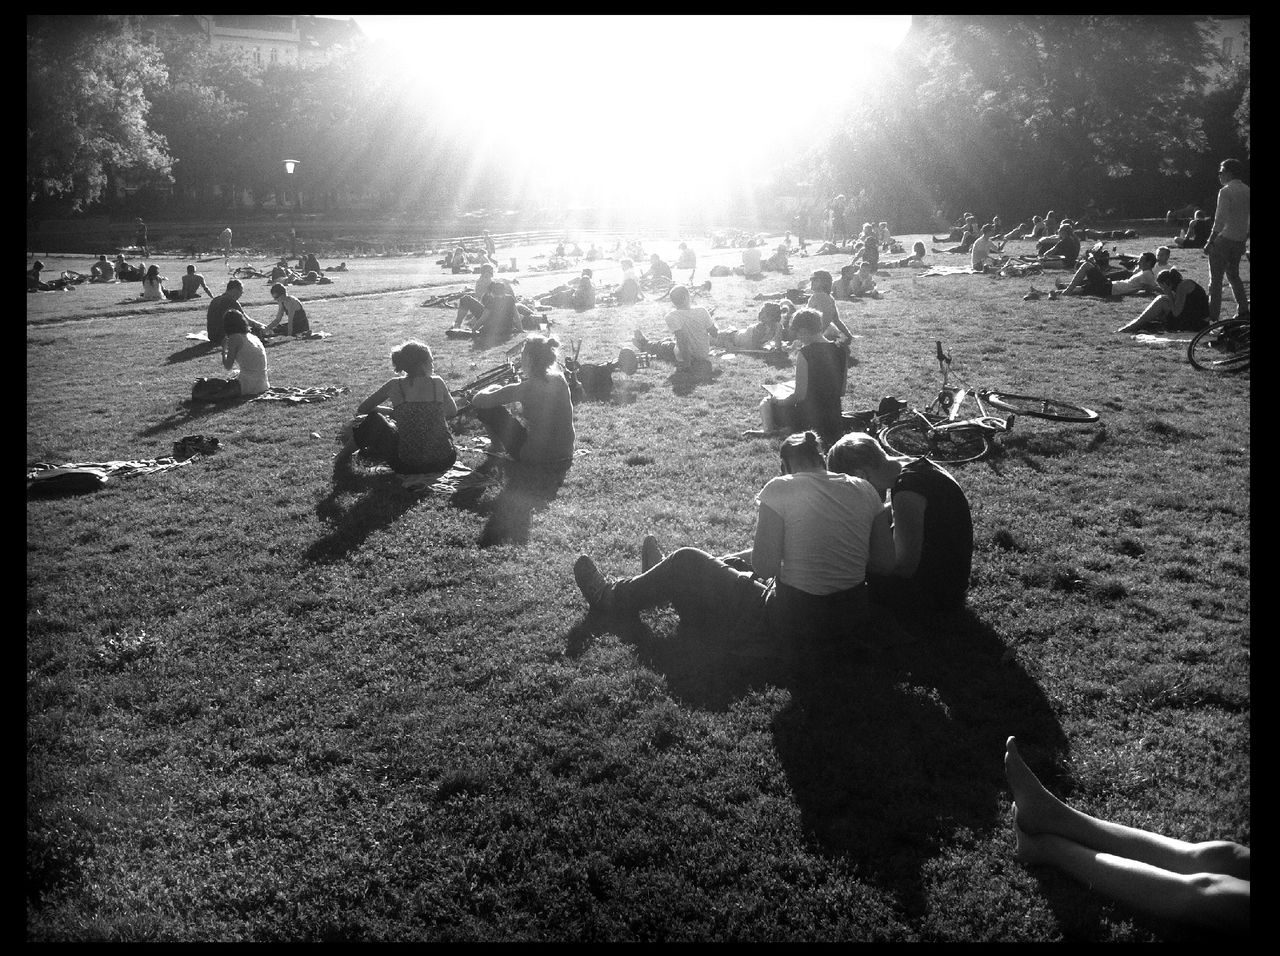 Large group of people sitting on grass